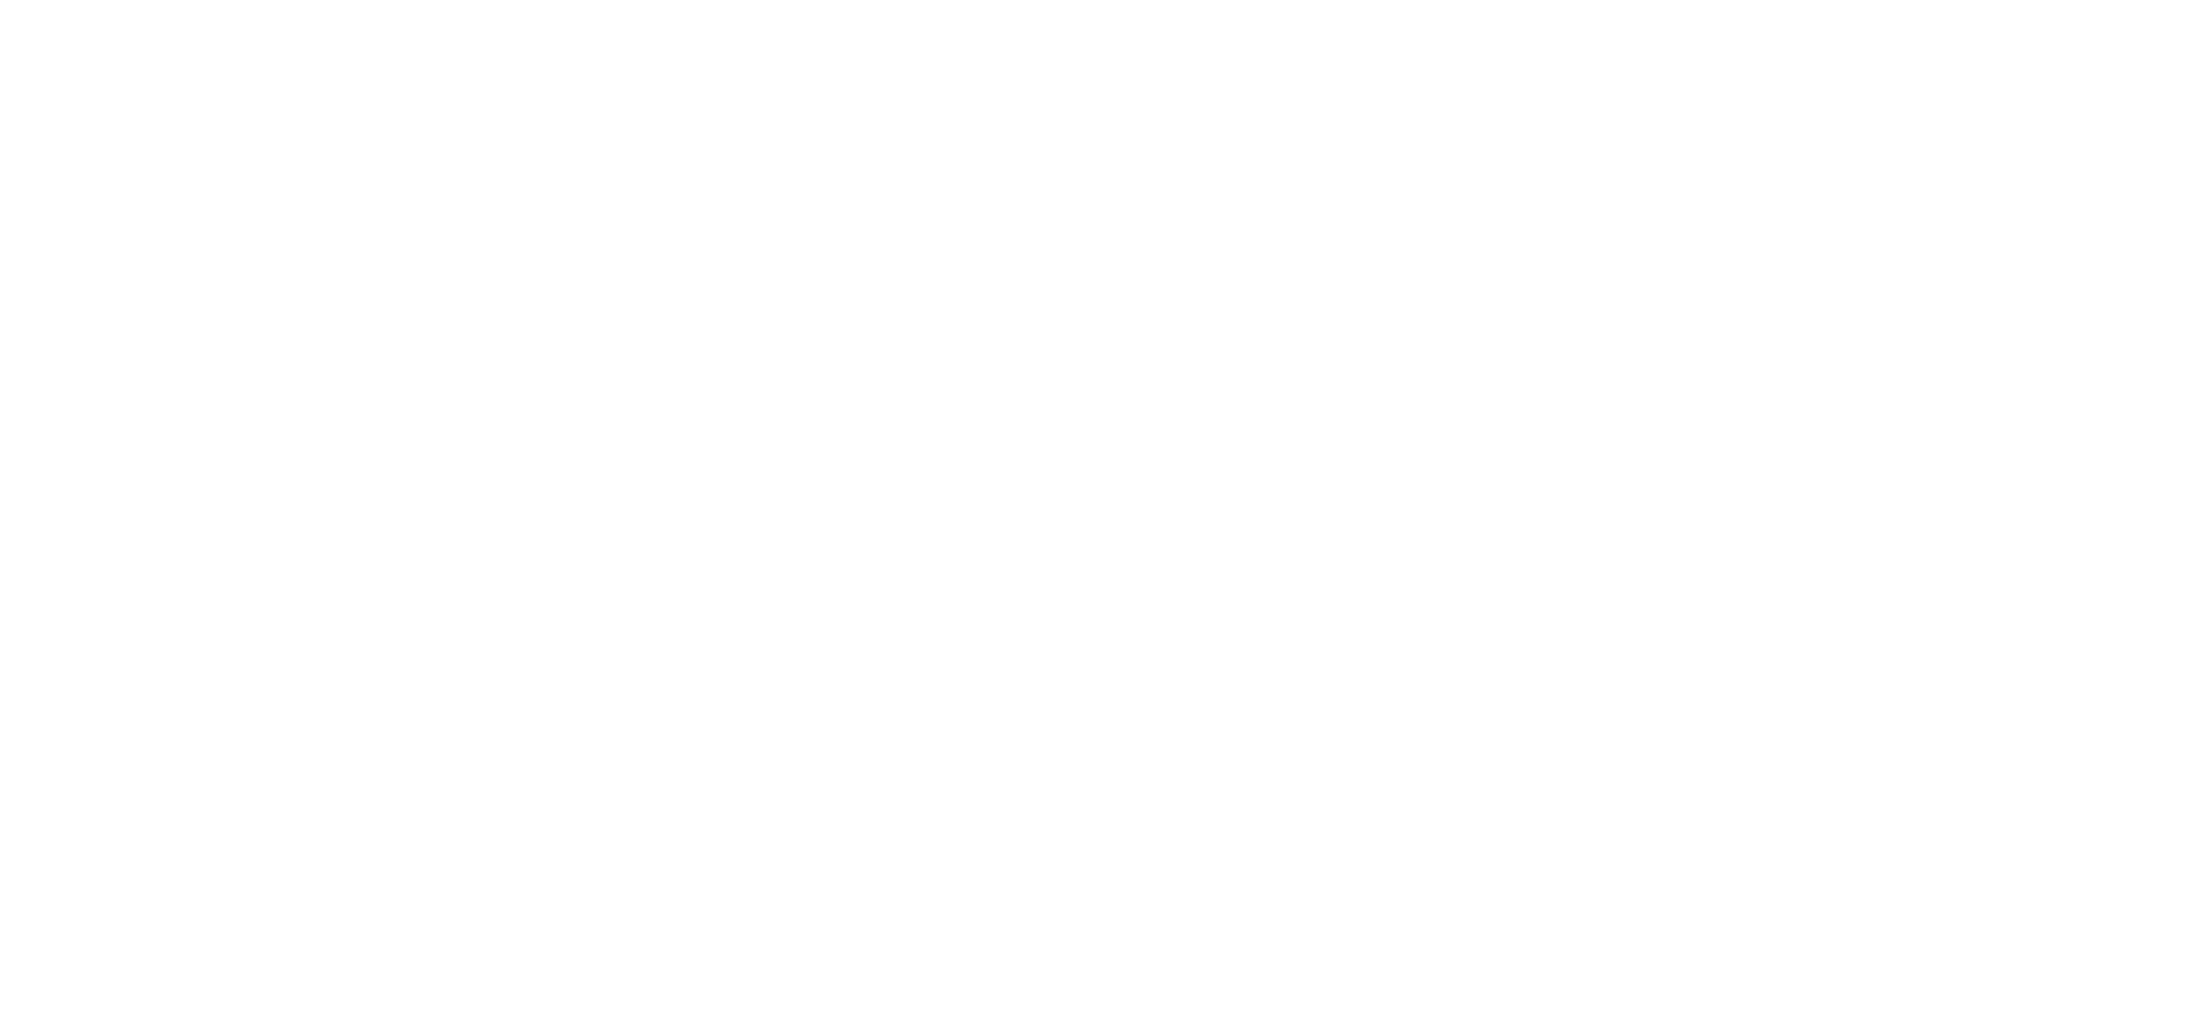 Humans in Harmony - Join the Movement